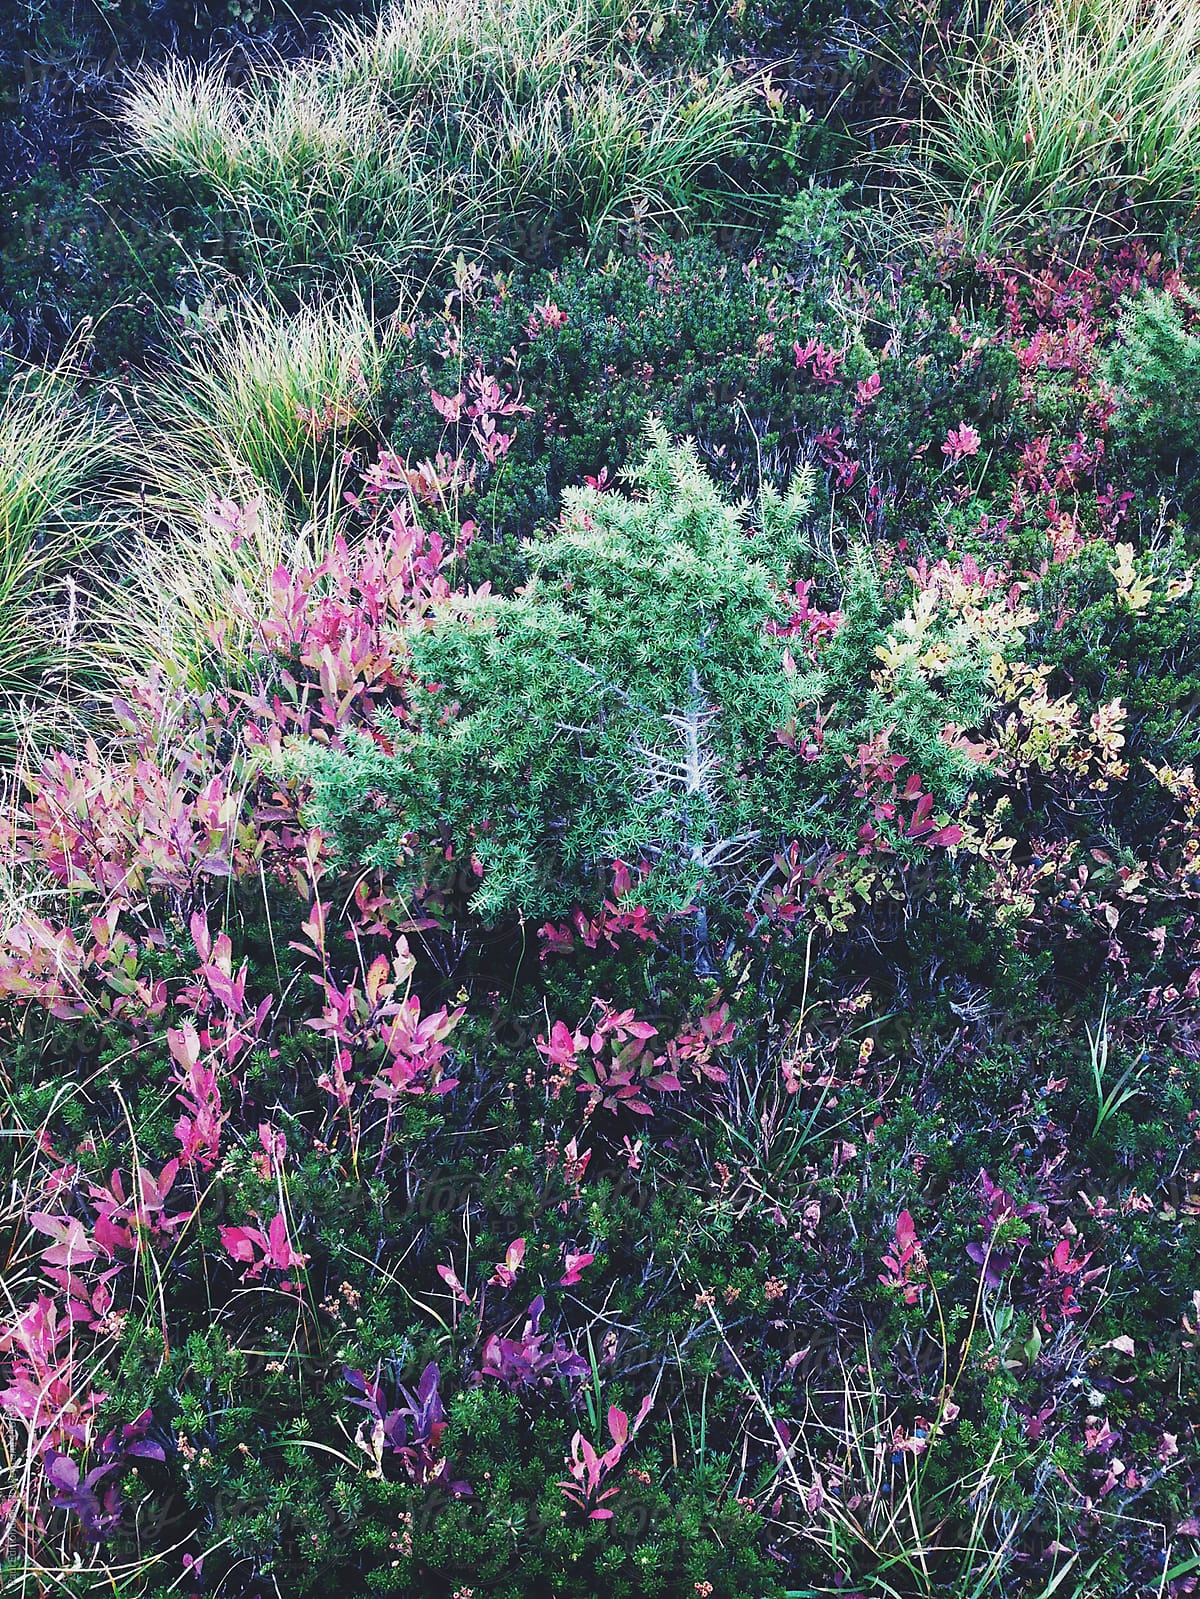 Detail of wildflowers, grasses and plants in alpine meadow in autumn